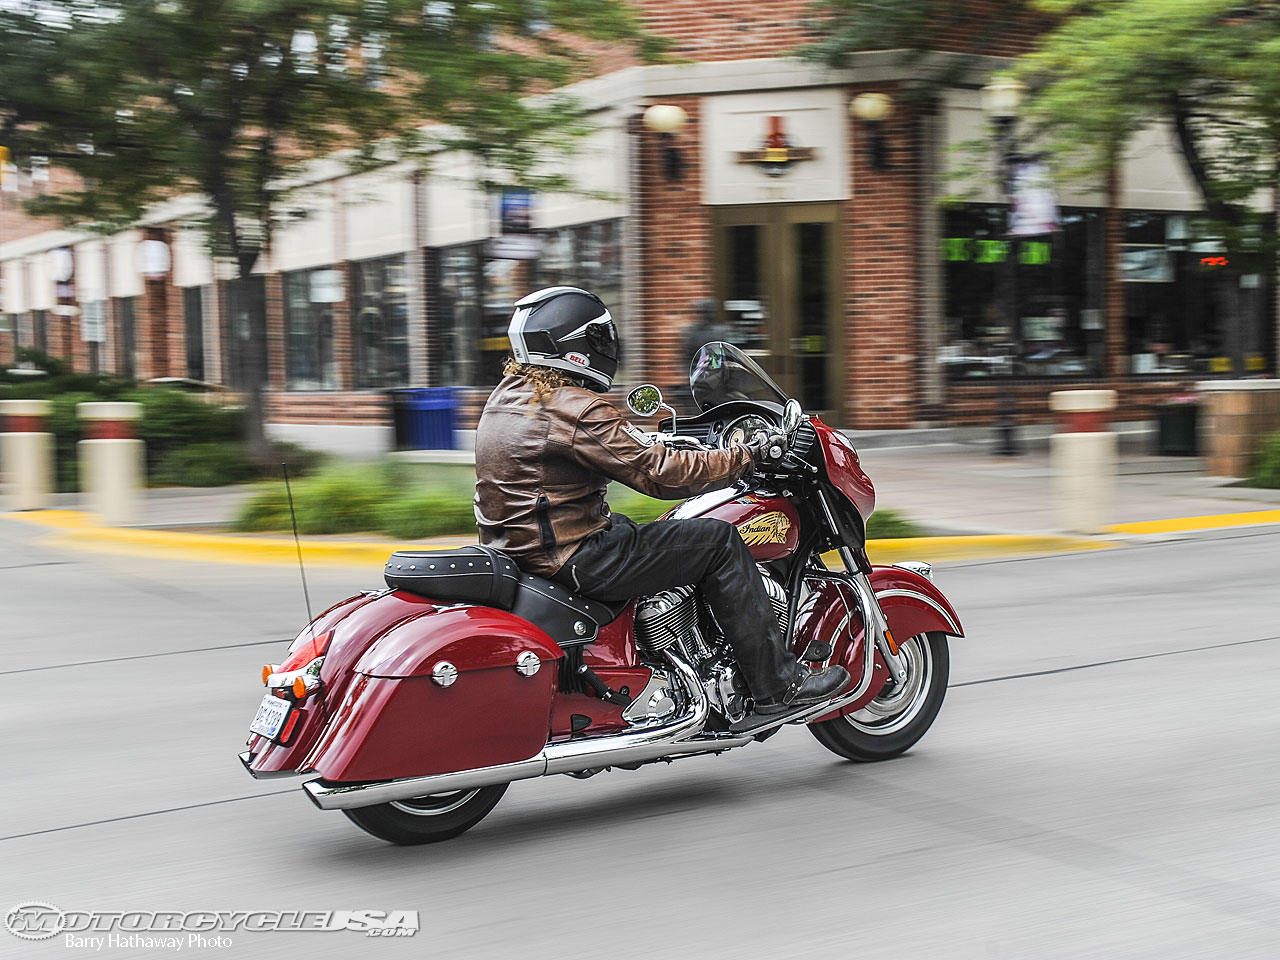 The Indian Chieftain Feels Slim In Saddle And Pact For A